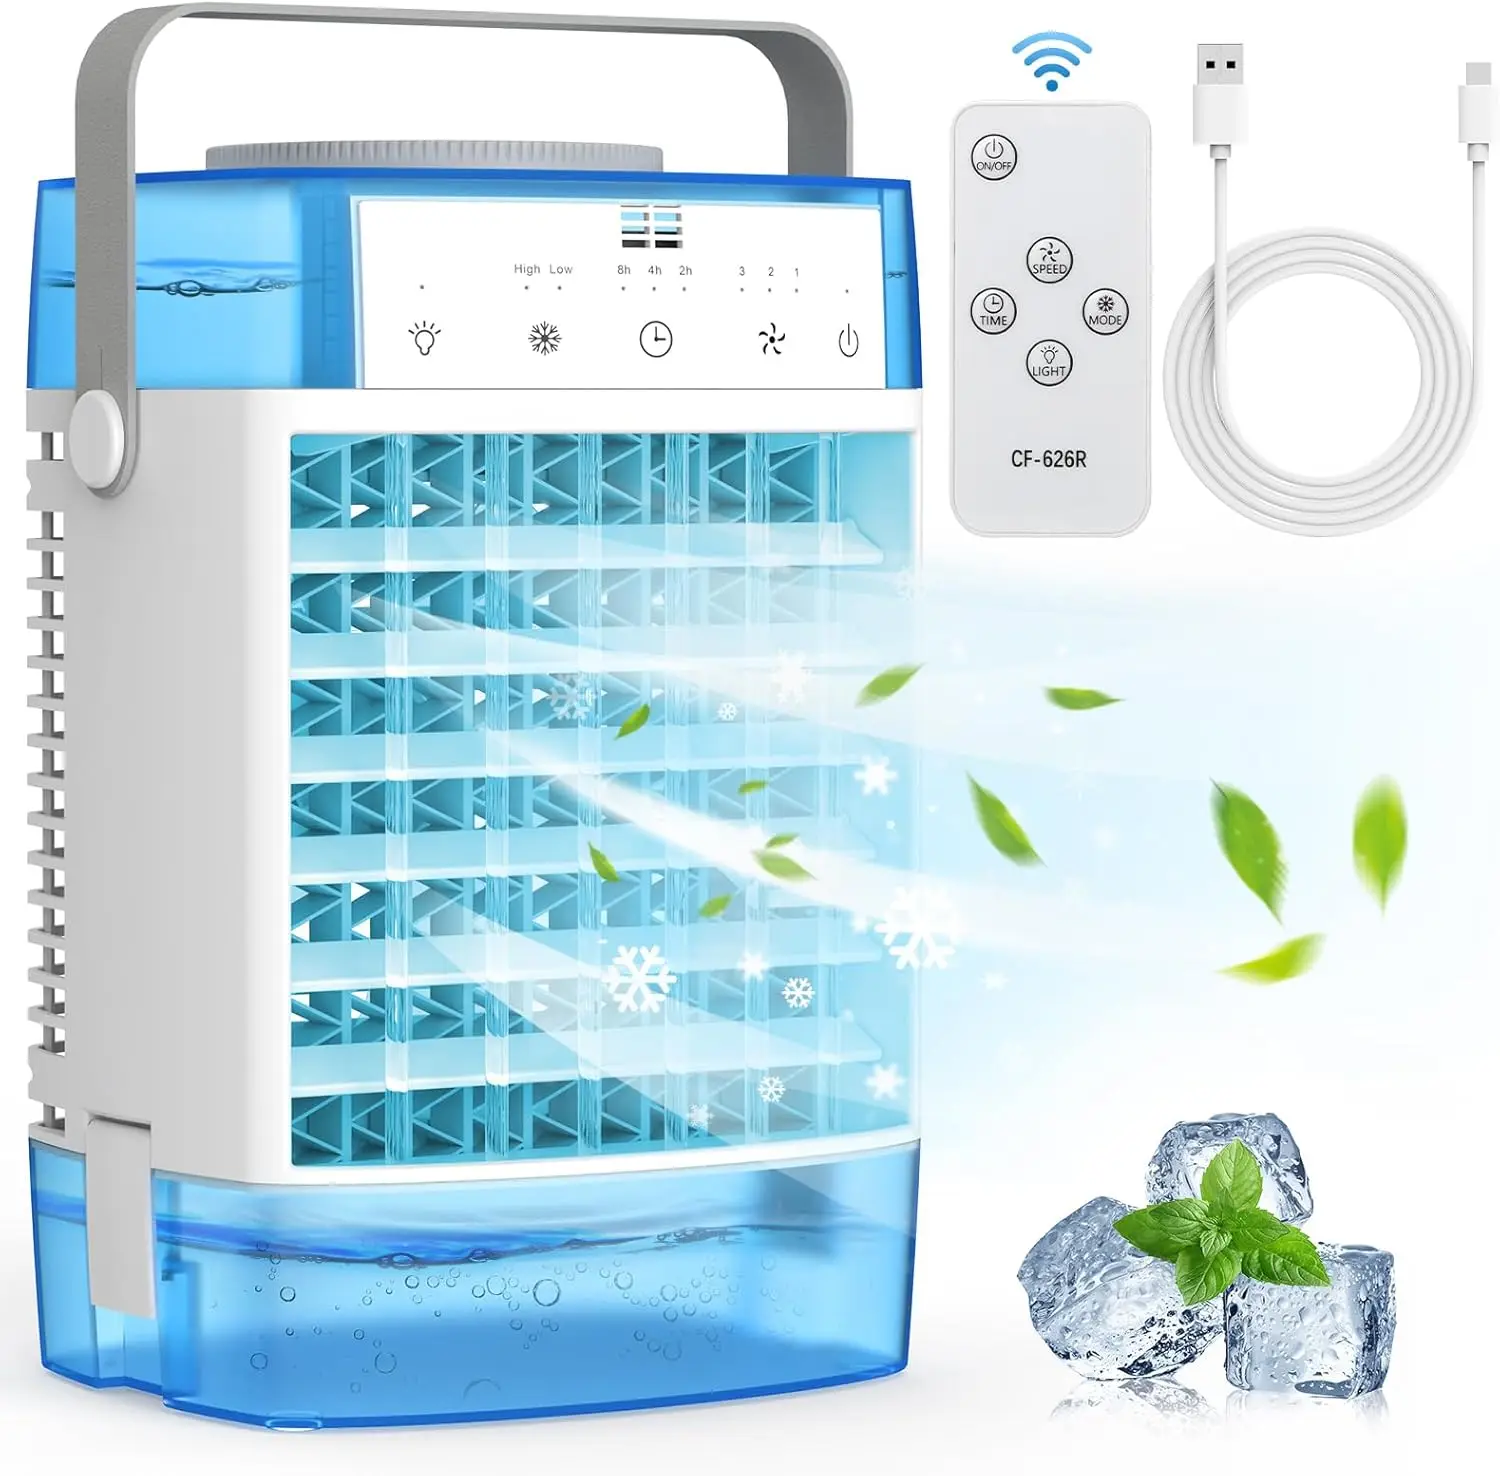 

Portable Air Conditioners,1600ml Portable AC Unit with Remote Control,Personal Mini Air Conditioner Portable for Room Bedroom